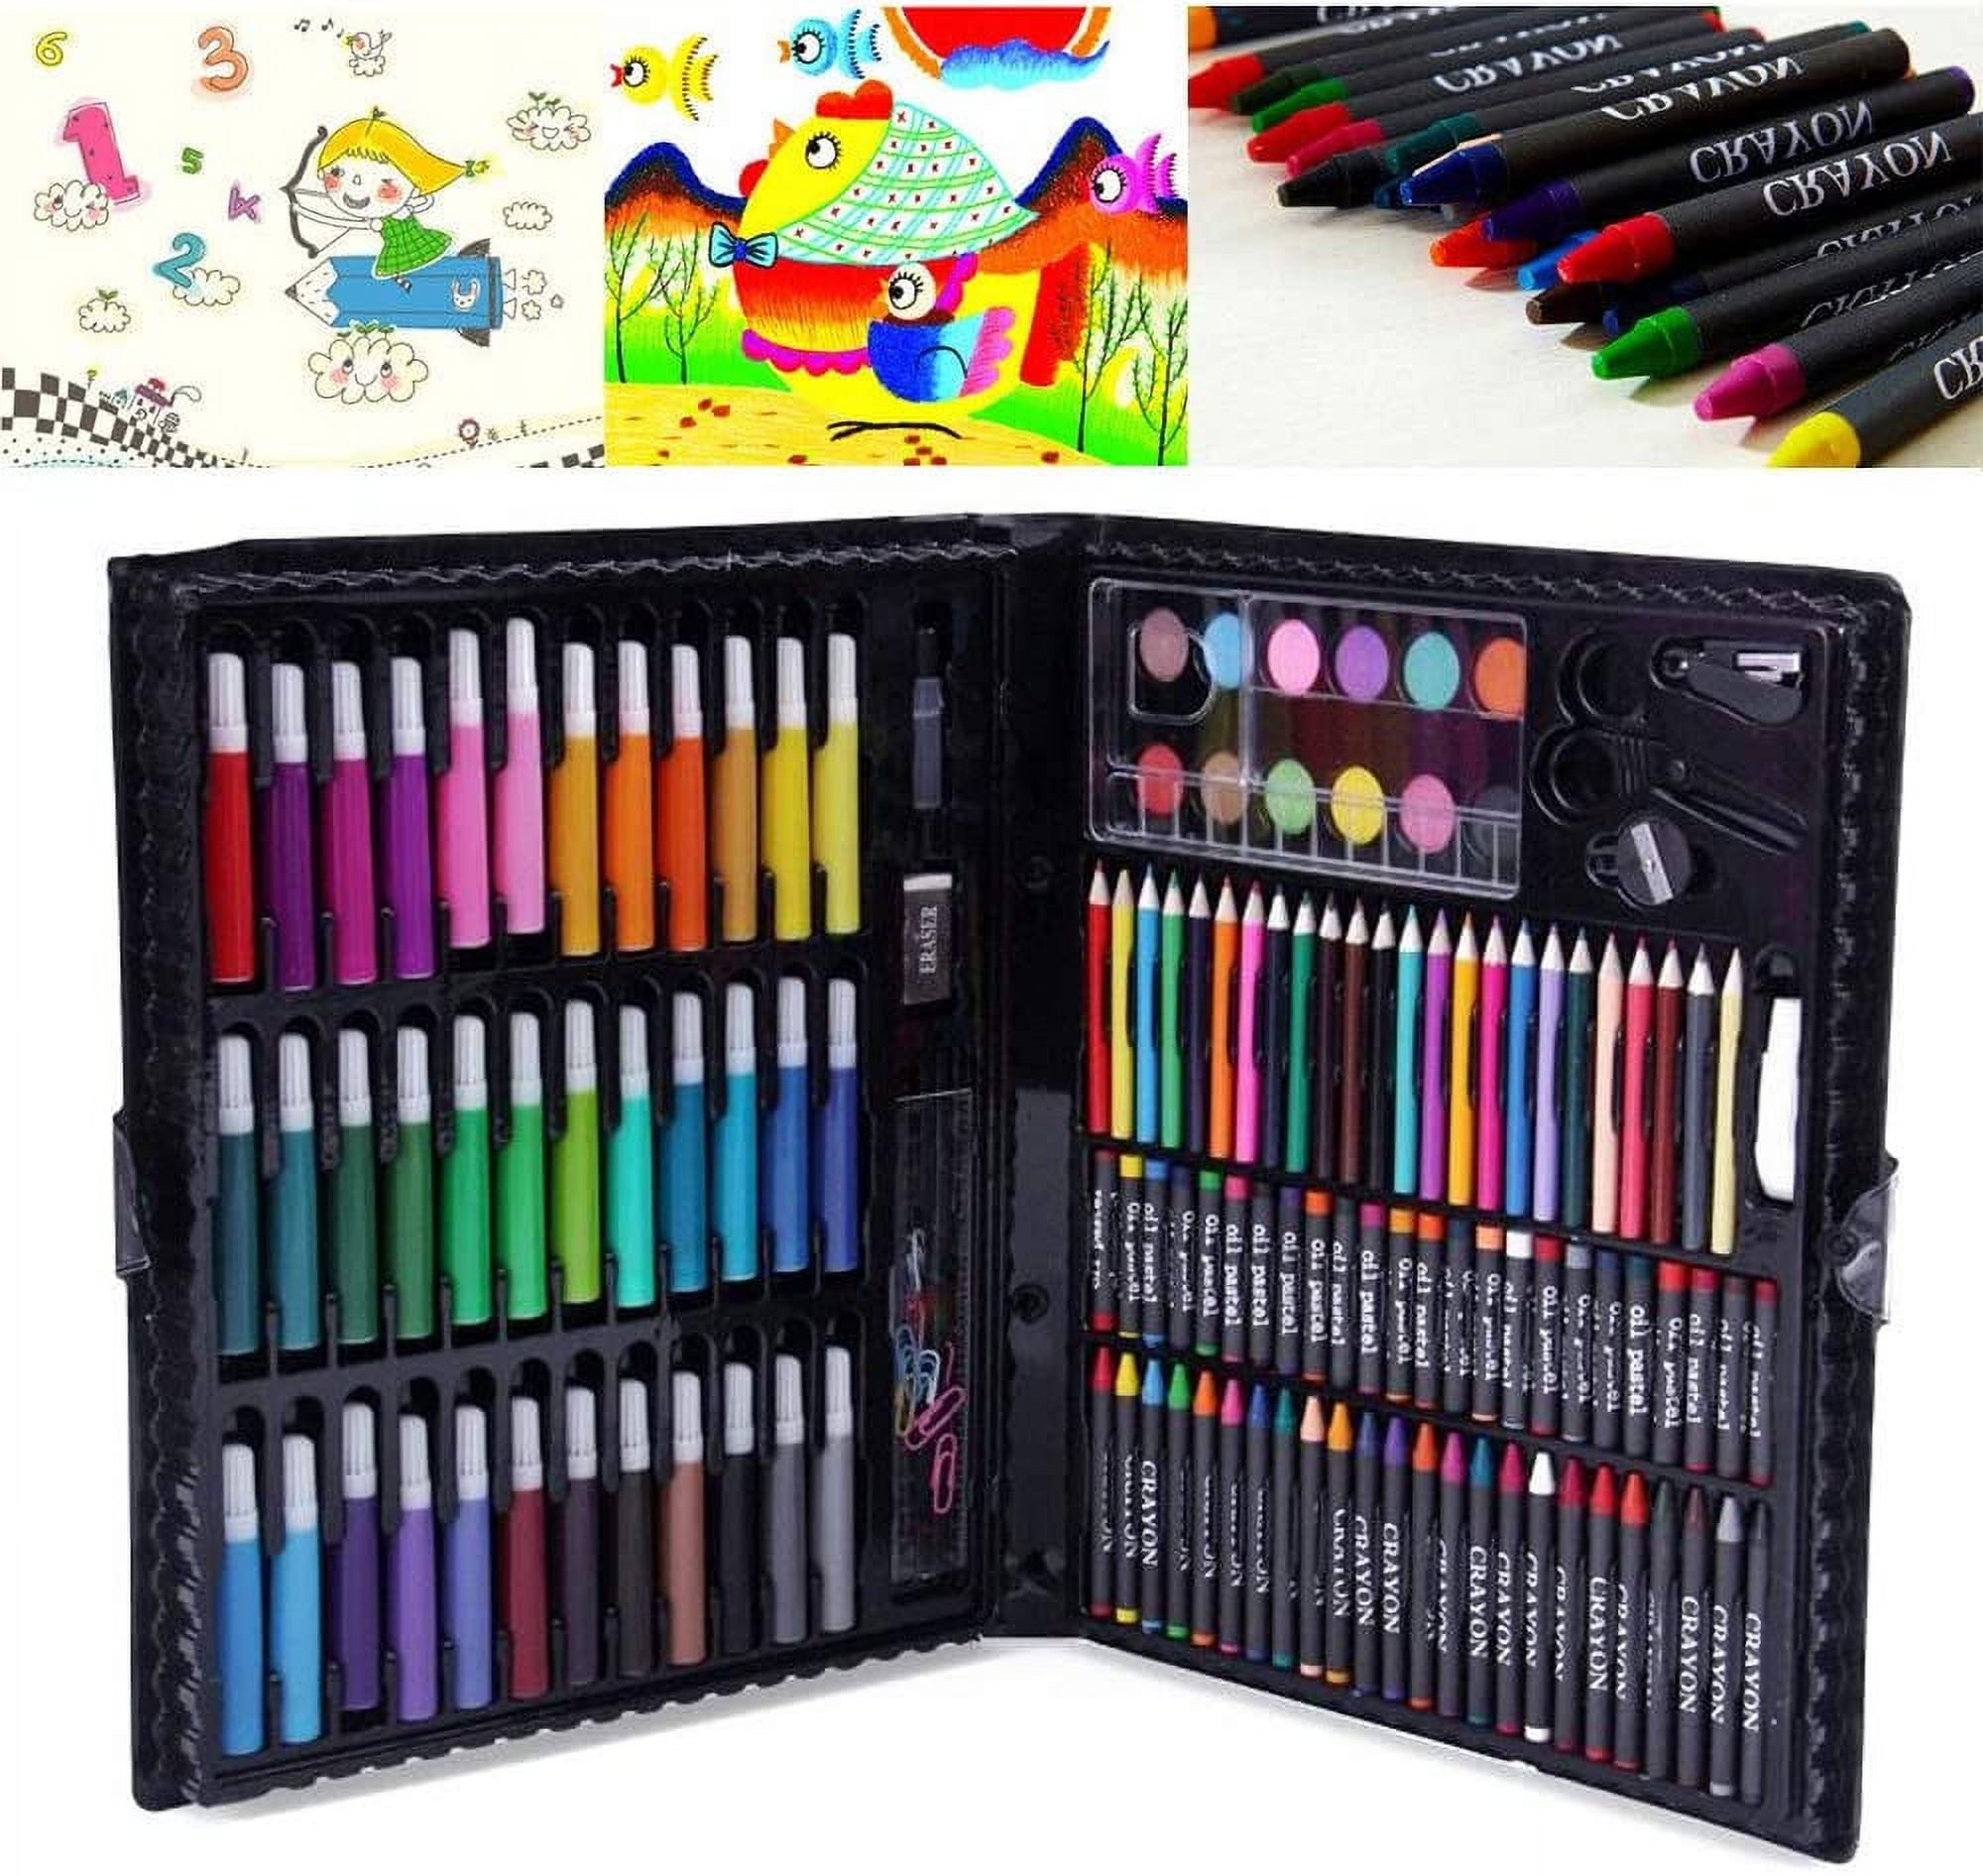 Posca Crayons Art Set of 24 Pastels Art Supplies, Crayons for Adults and Kids  Ages 2-4 and Up Toddler Crayons and Adult Crayons Crayons Bulk Coloring Set  Crayon Box